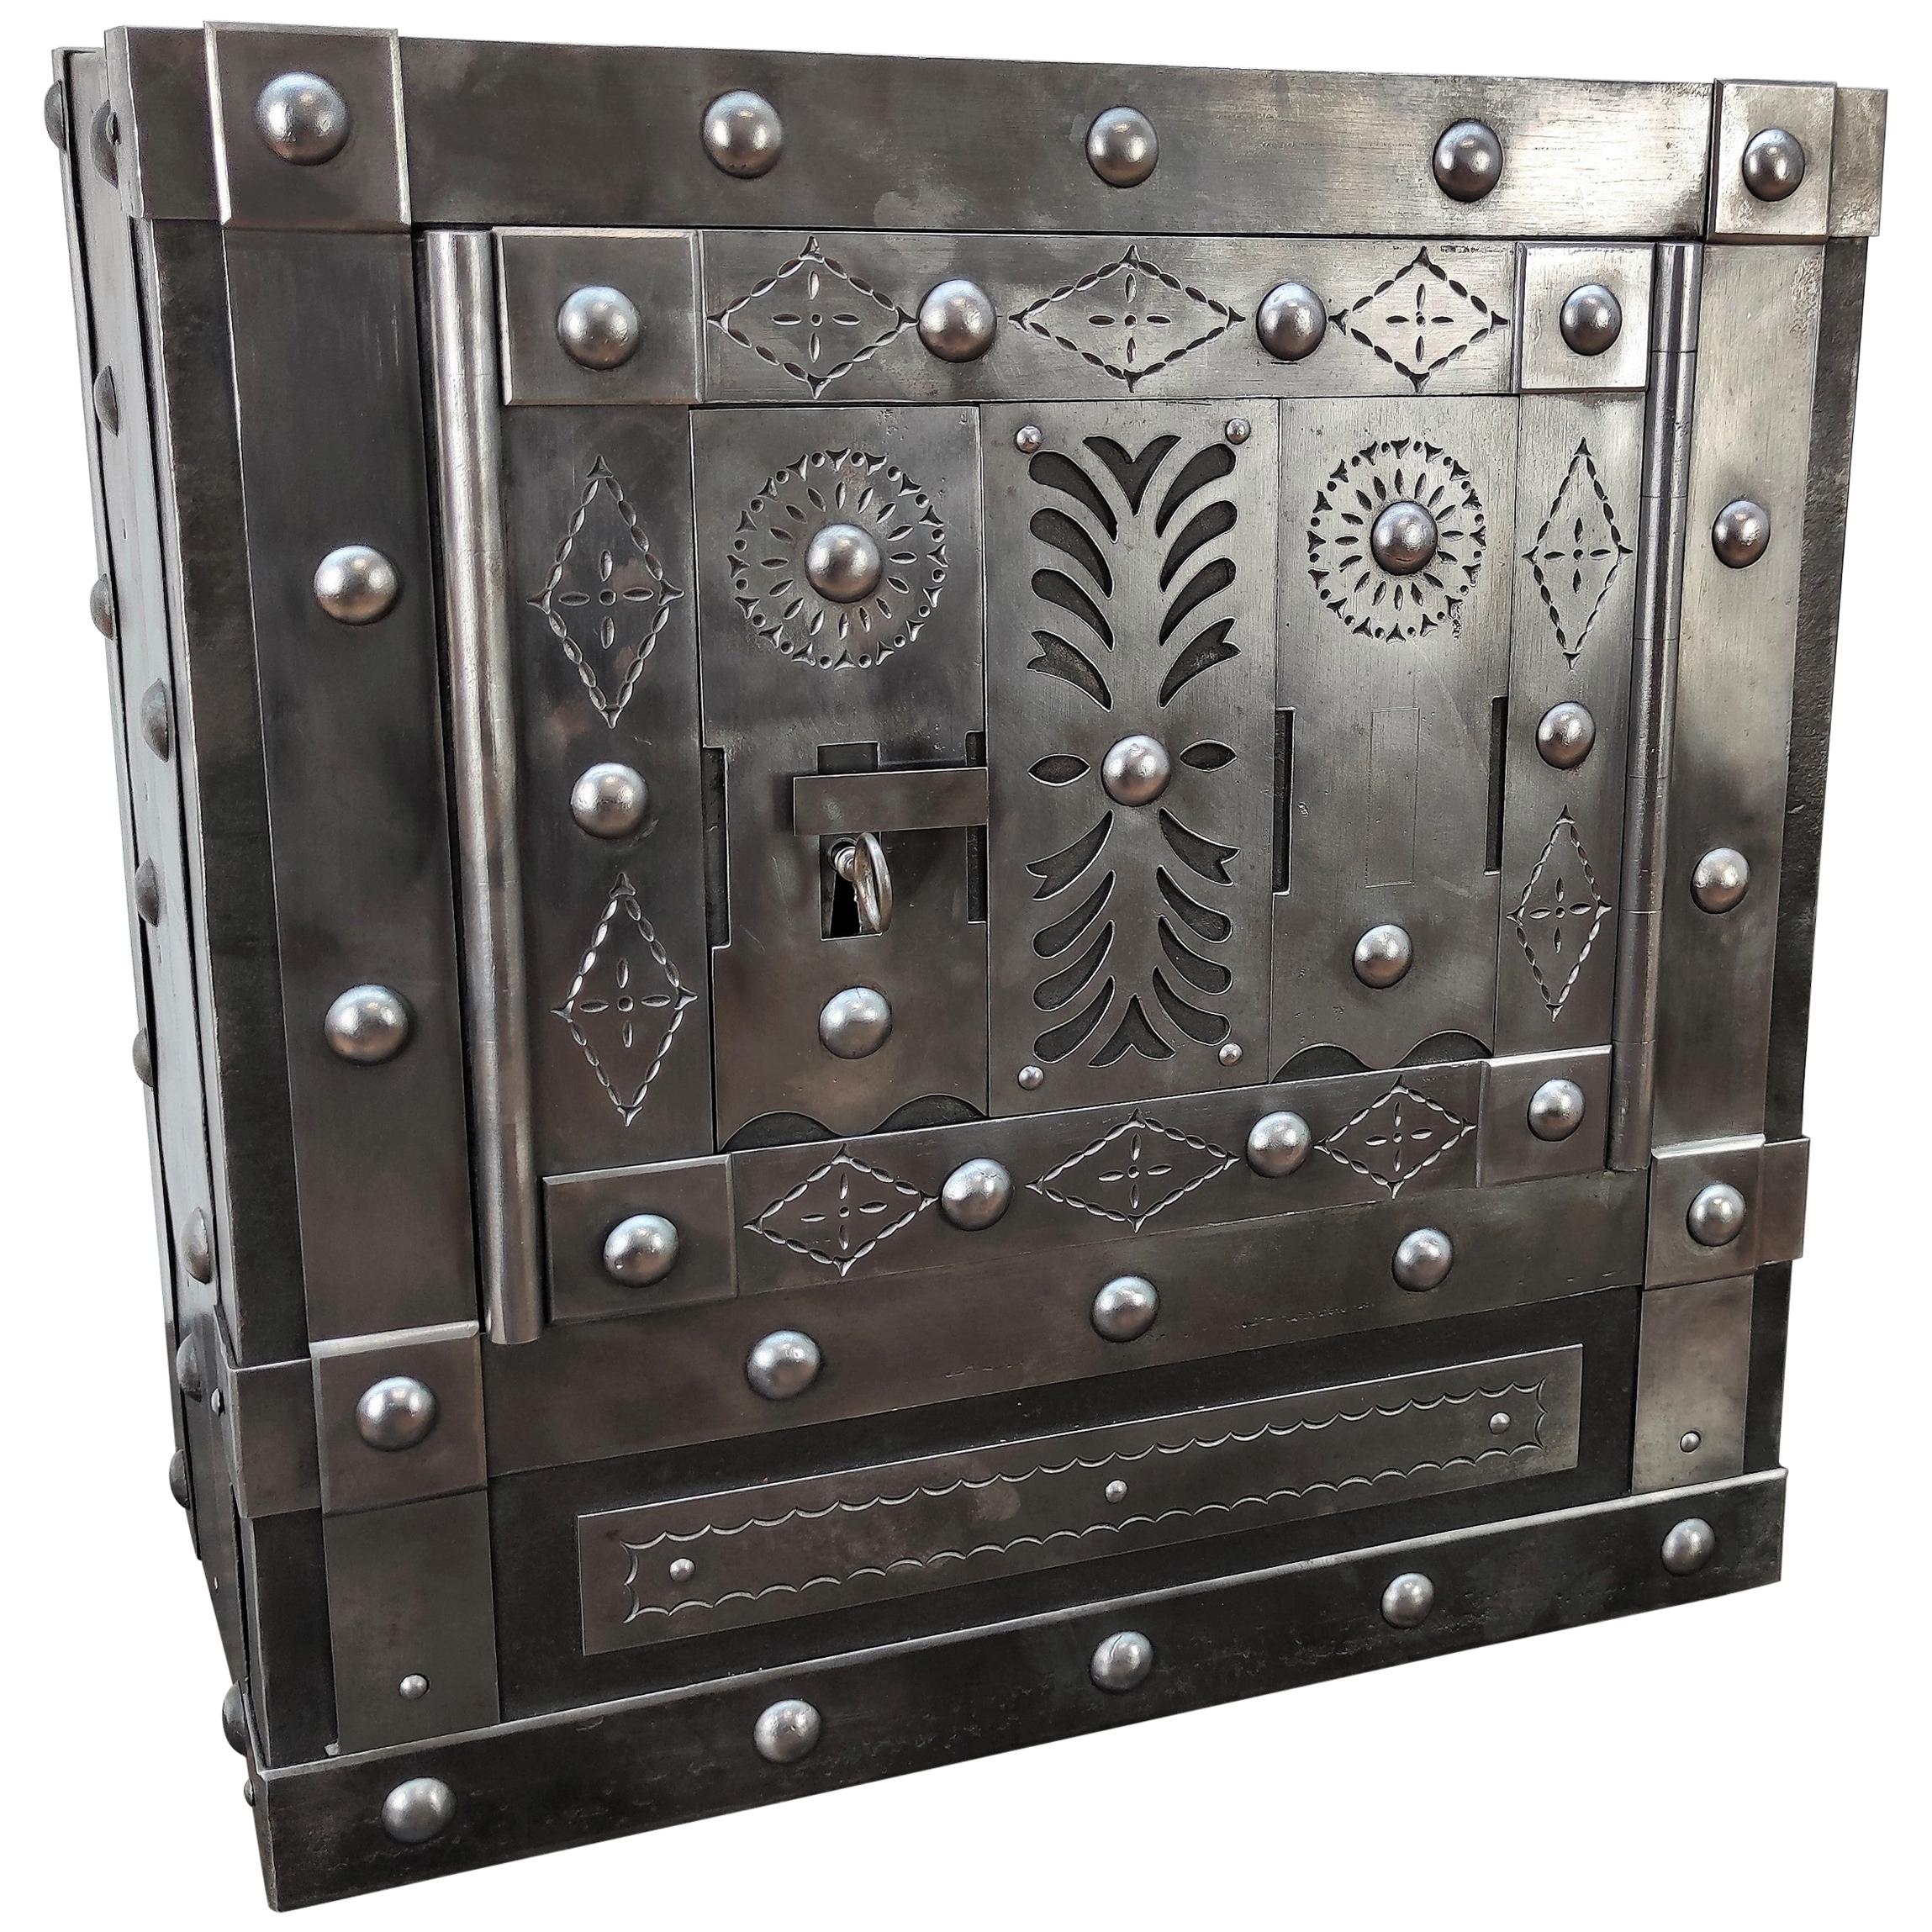 1820 Antique Italian Wrought Iron Studded Antique Safe Strongbox Dry Bar Cabinet